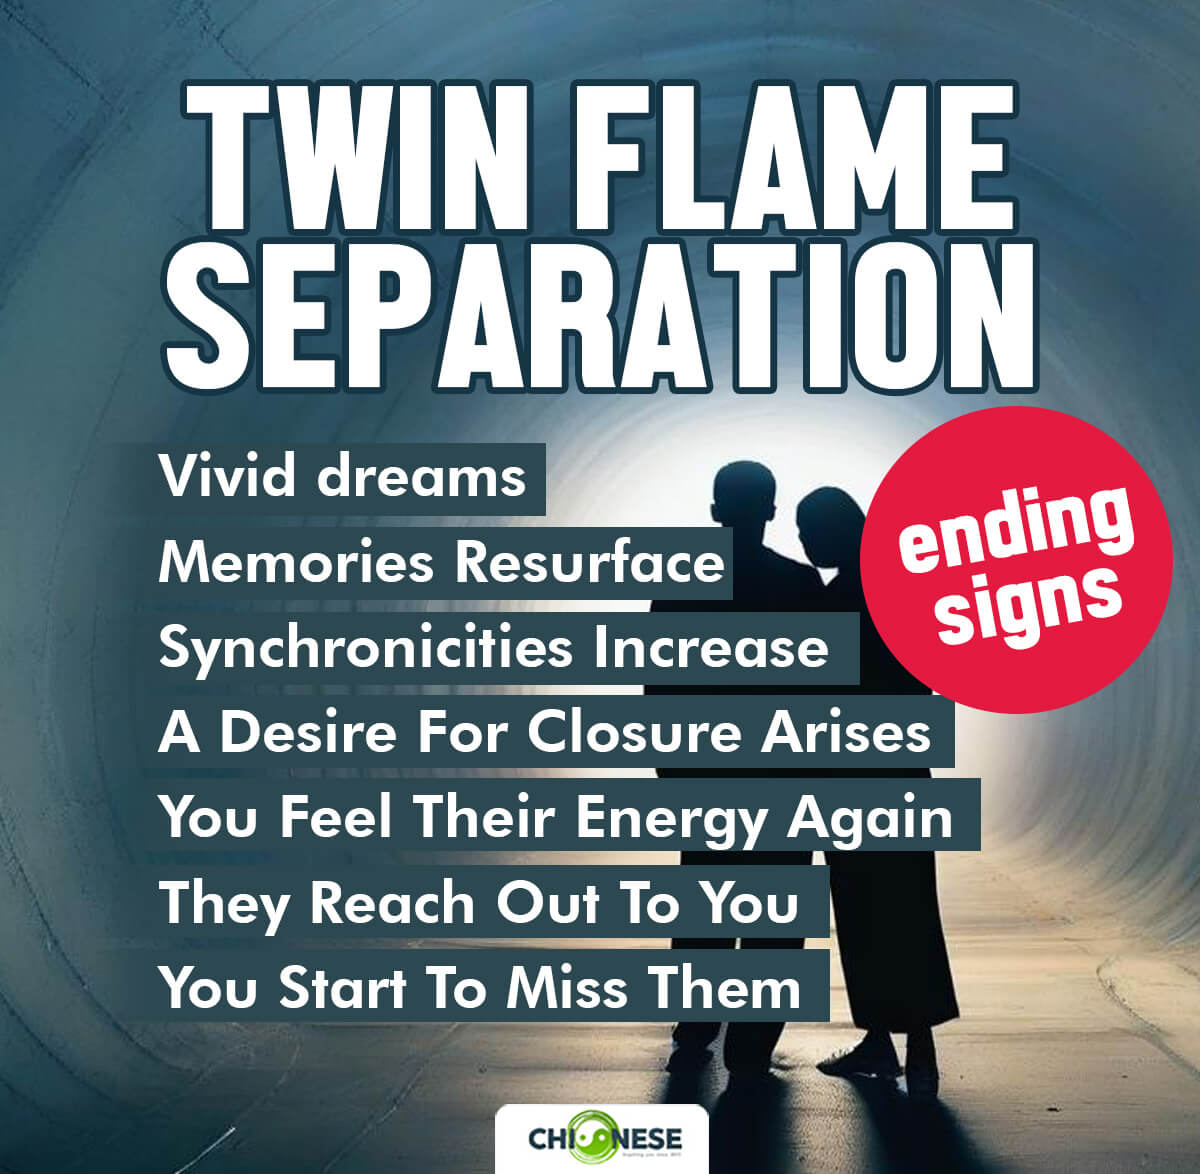 twin flame separation ending signs